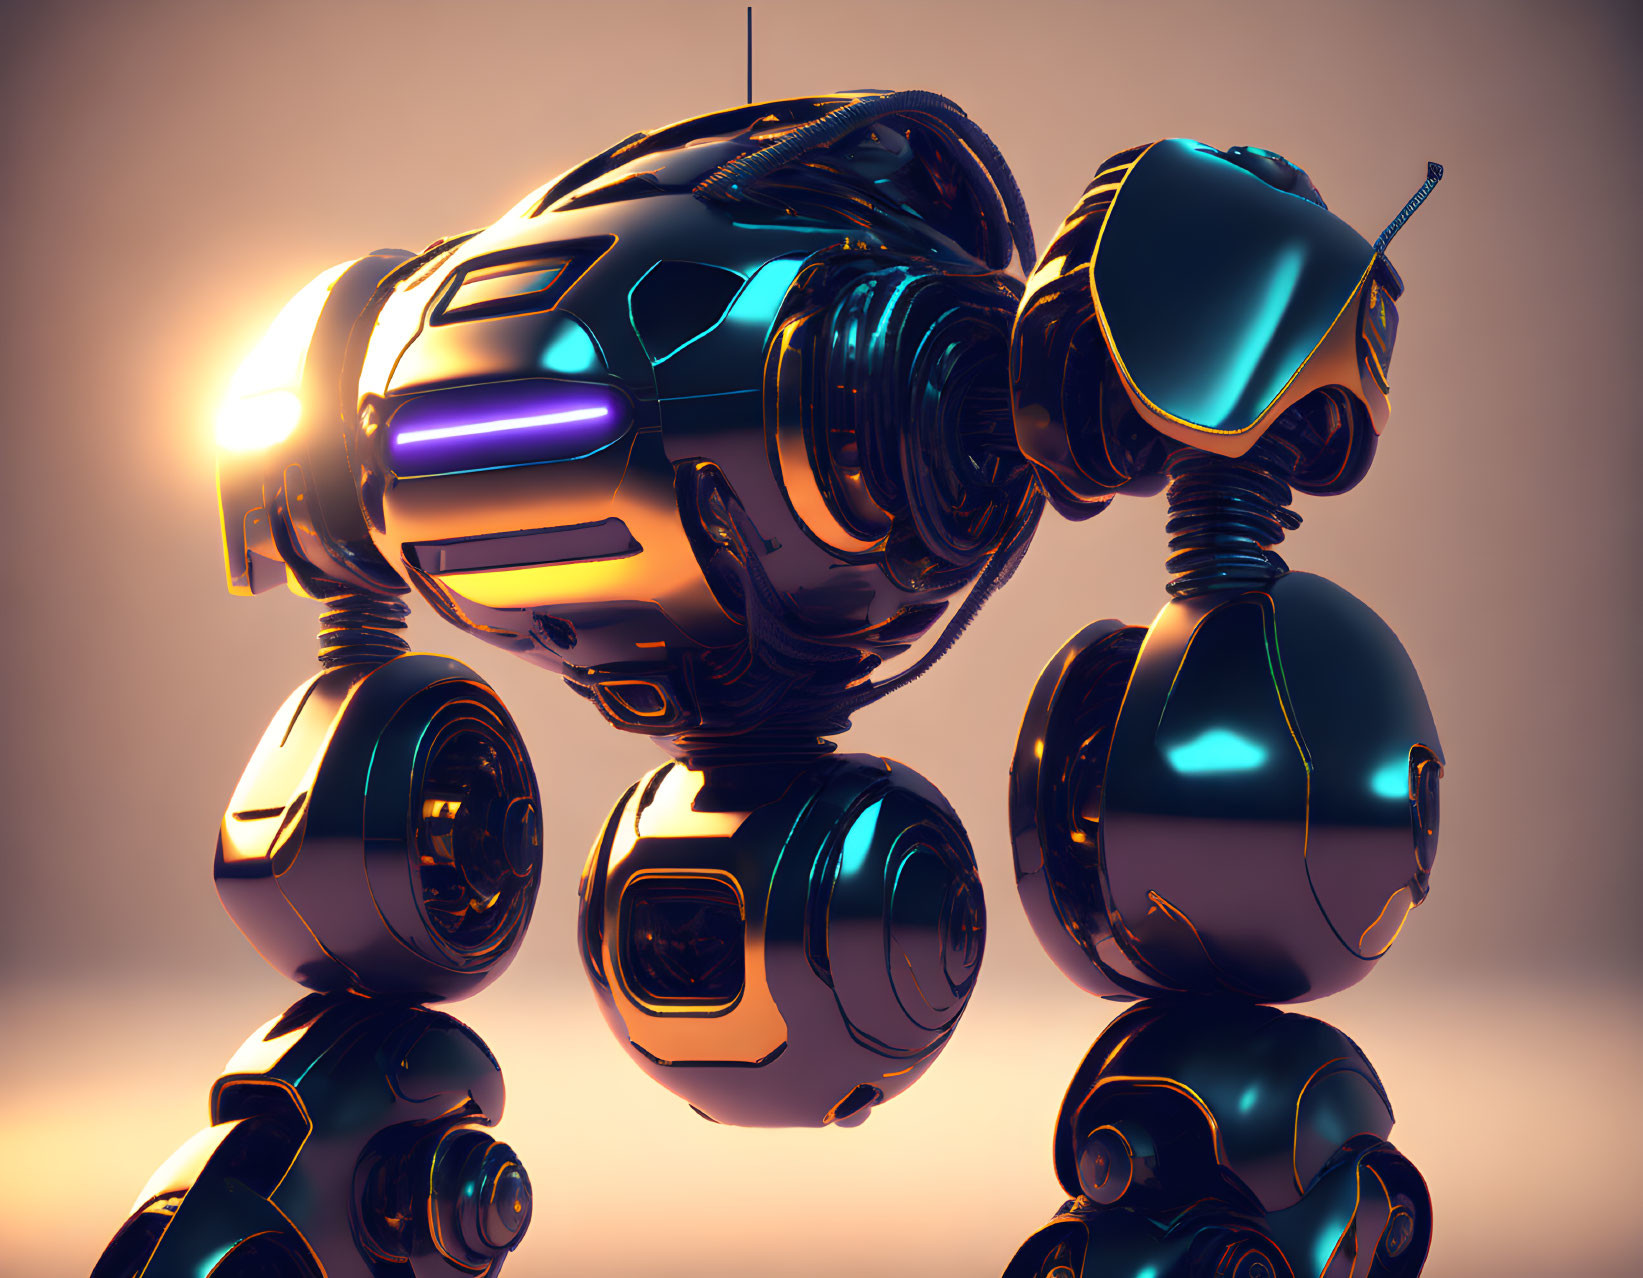 Spherical Futuristic Robot with Purple Lighting on Warm Background